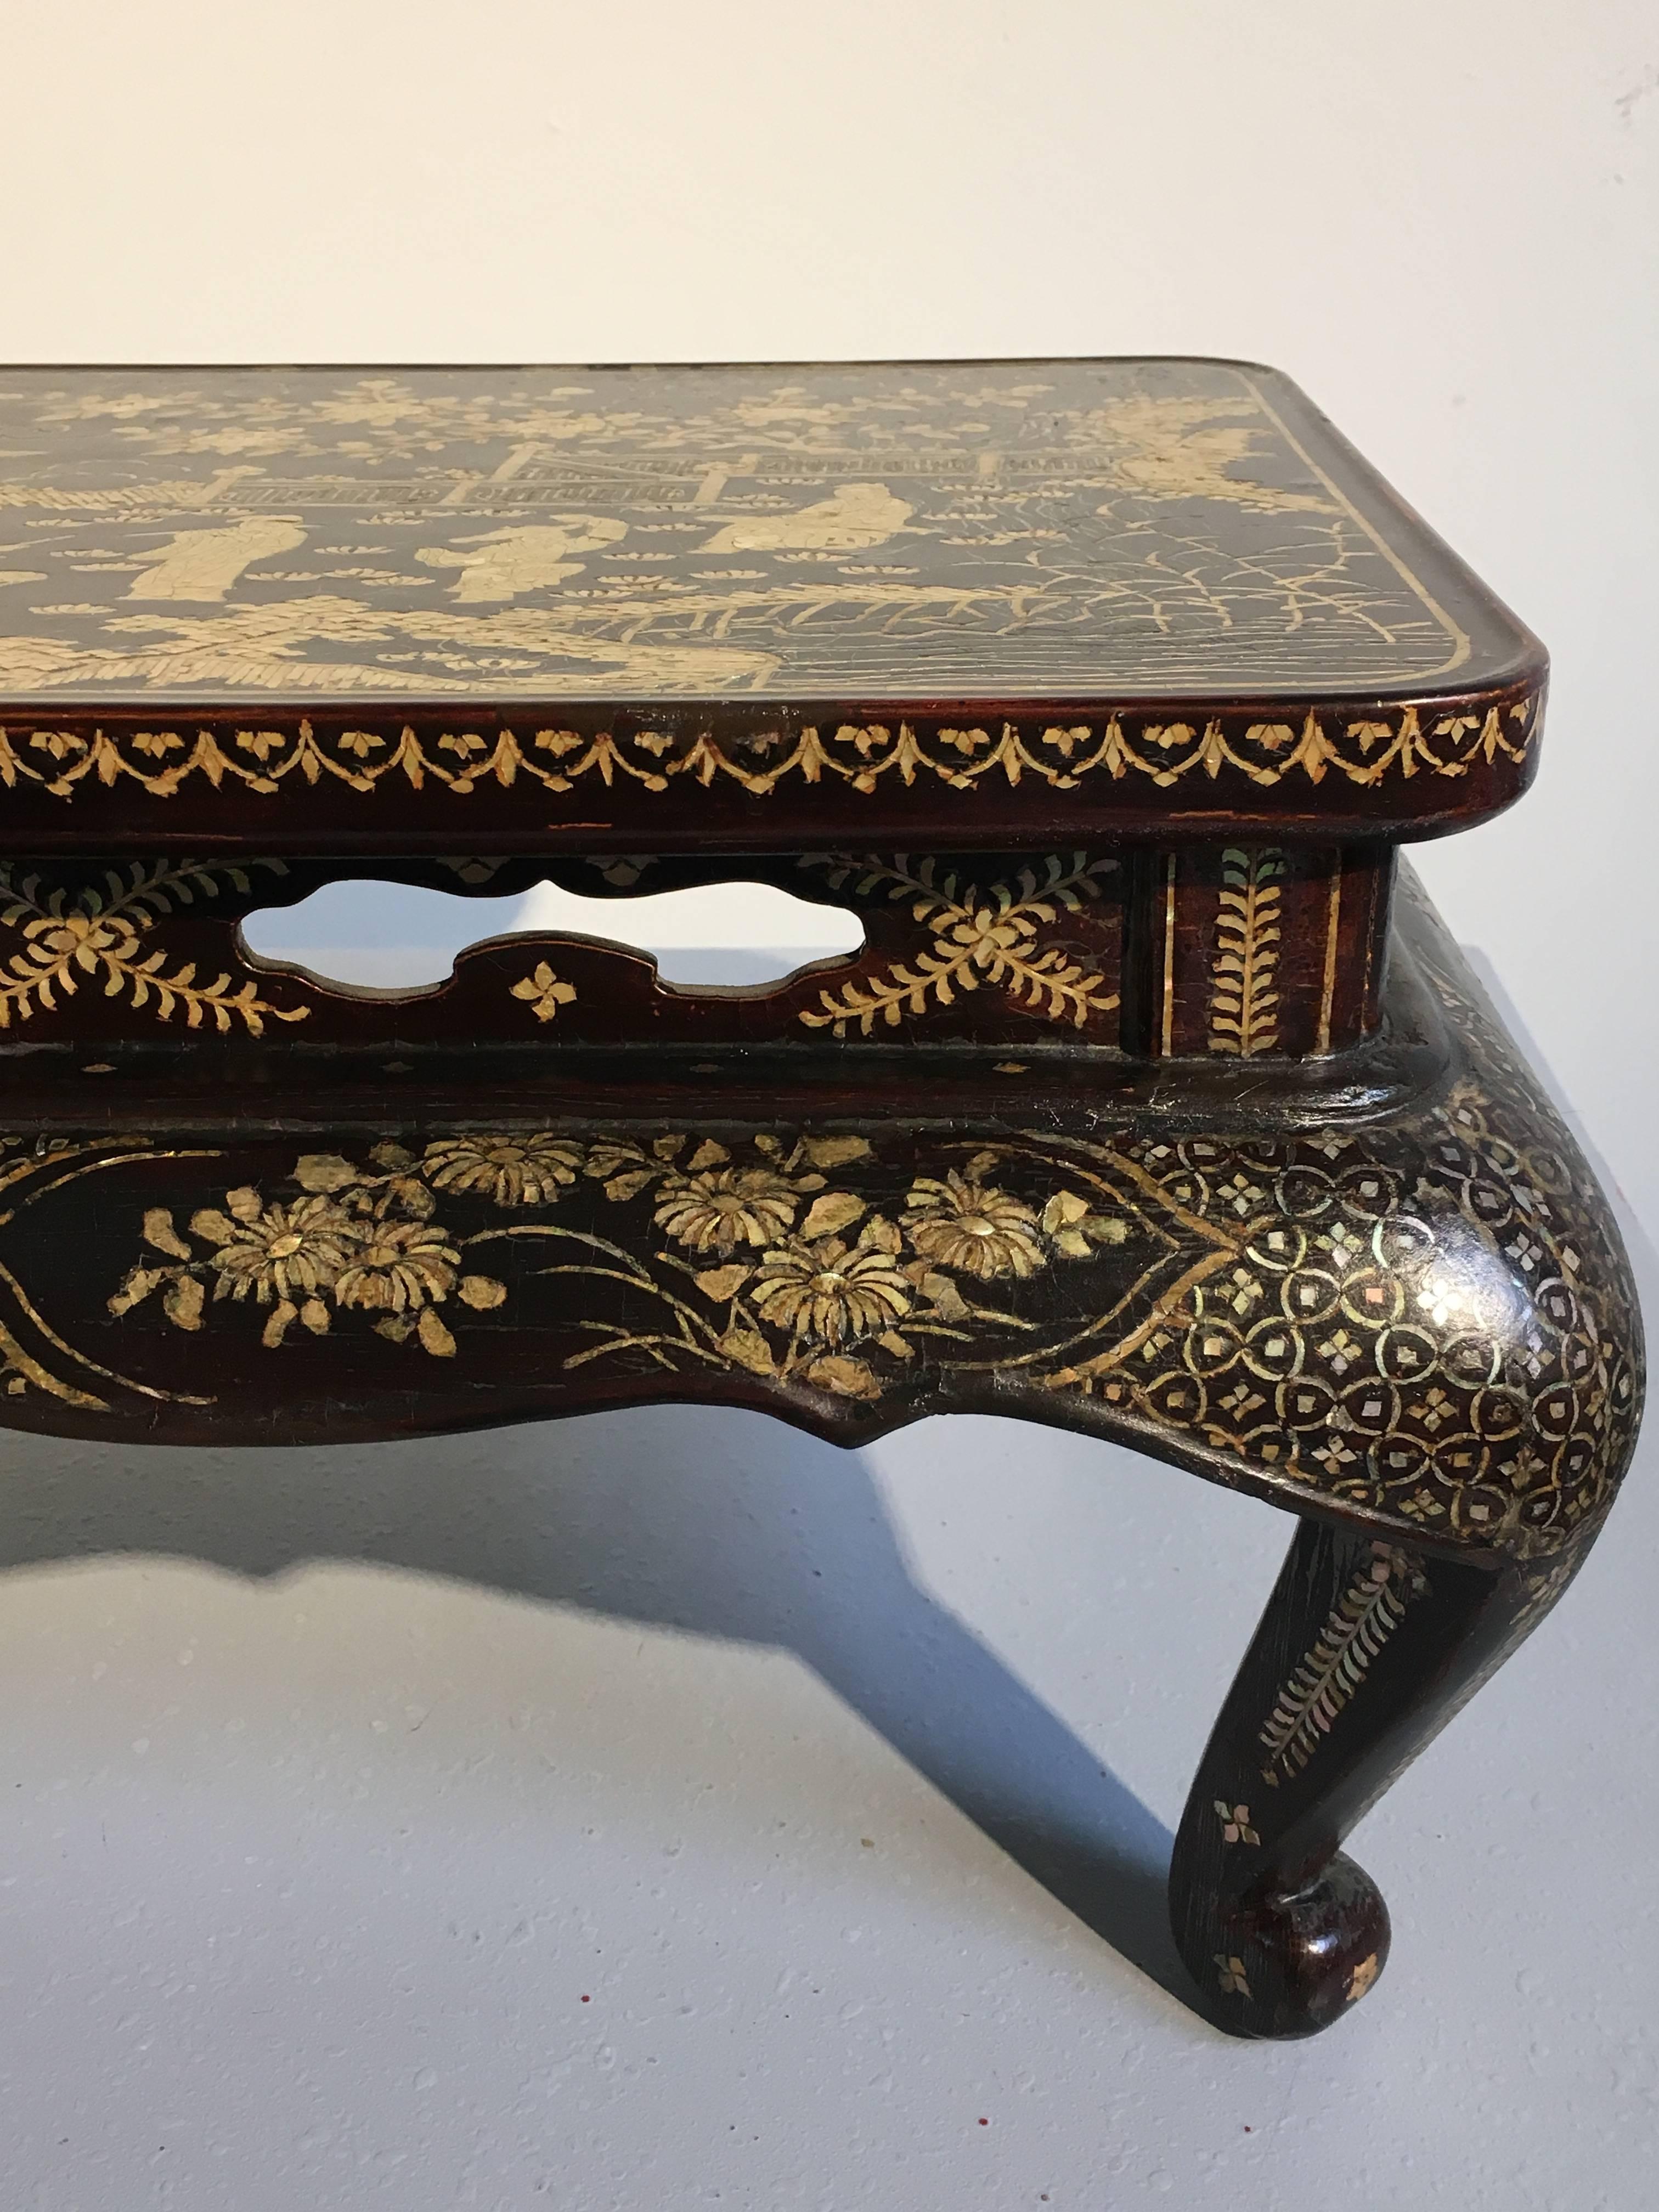 Qing Dynasty Chinese Lacquer and Mother-of-Pearl Small Table, 18th-19th Century 11